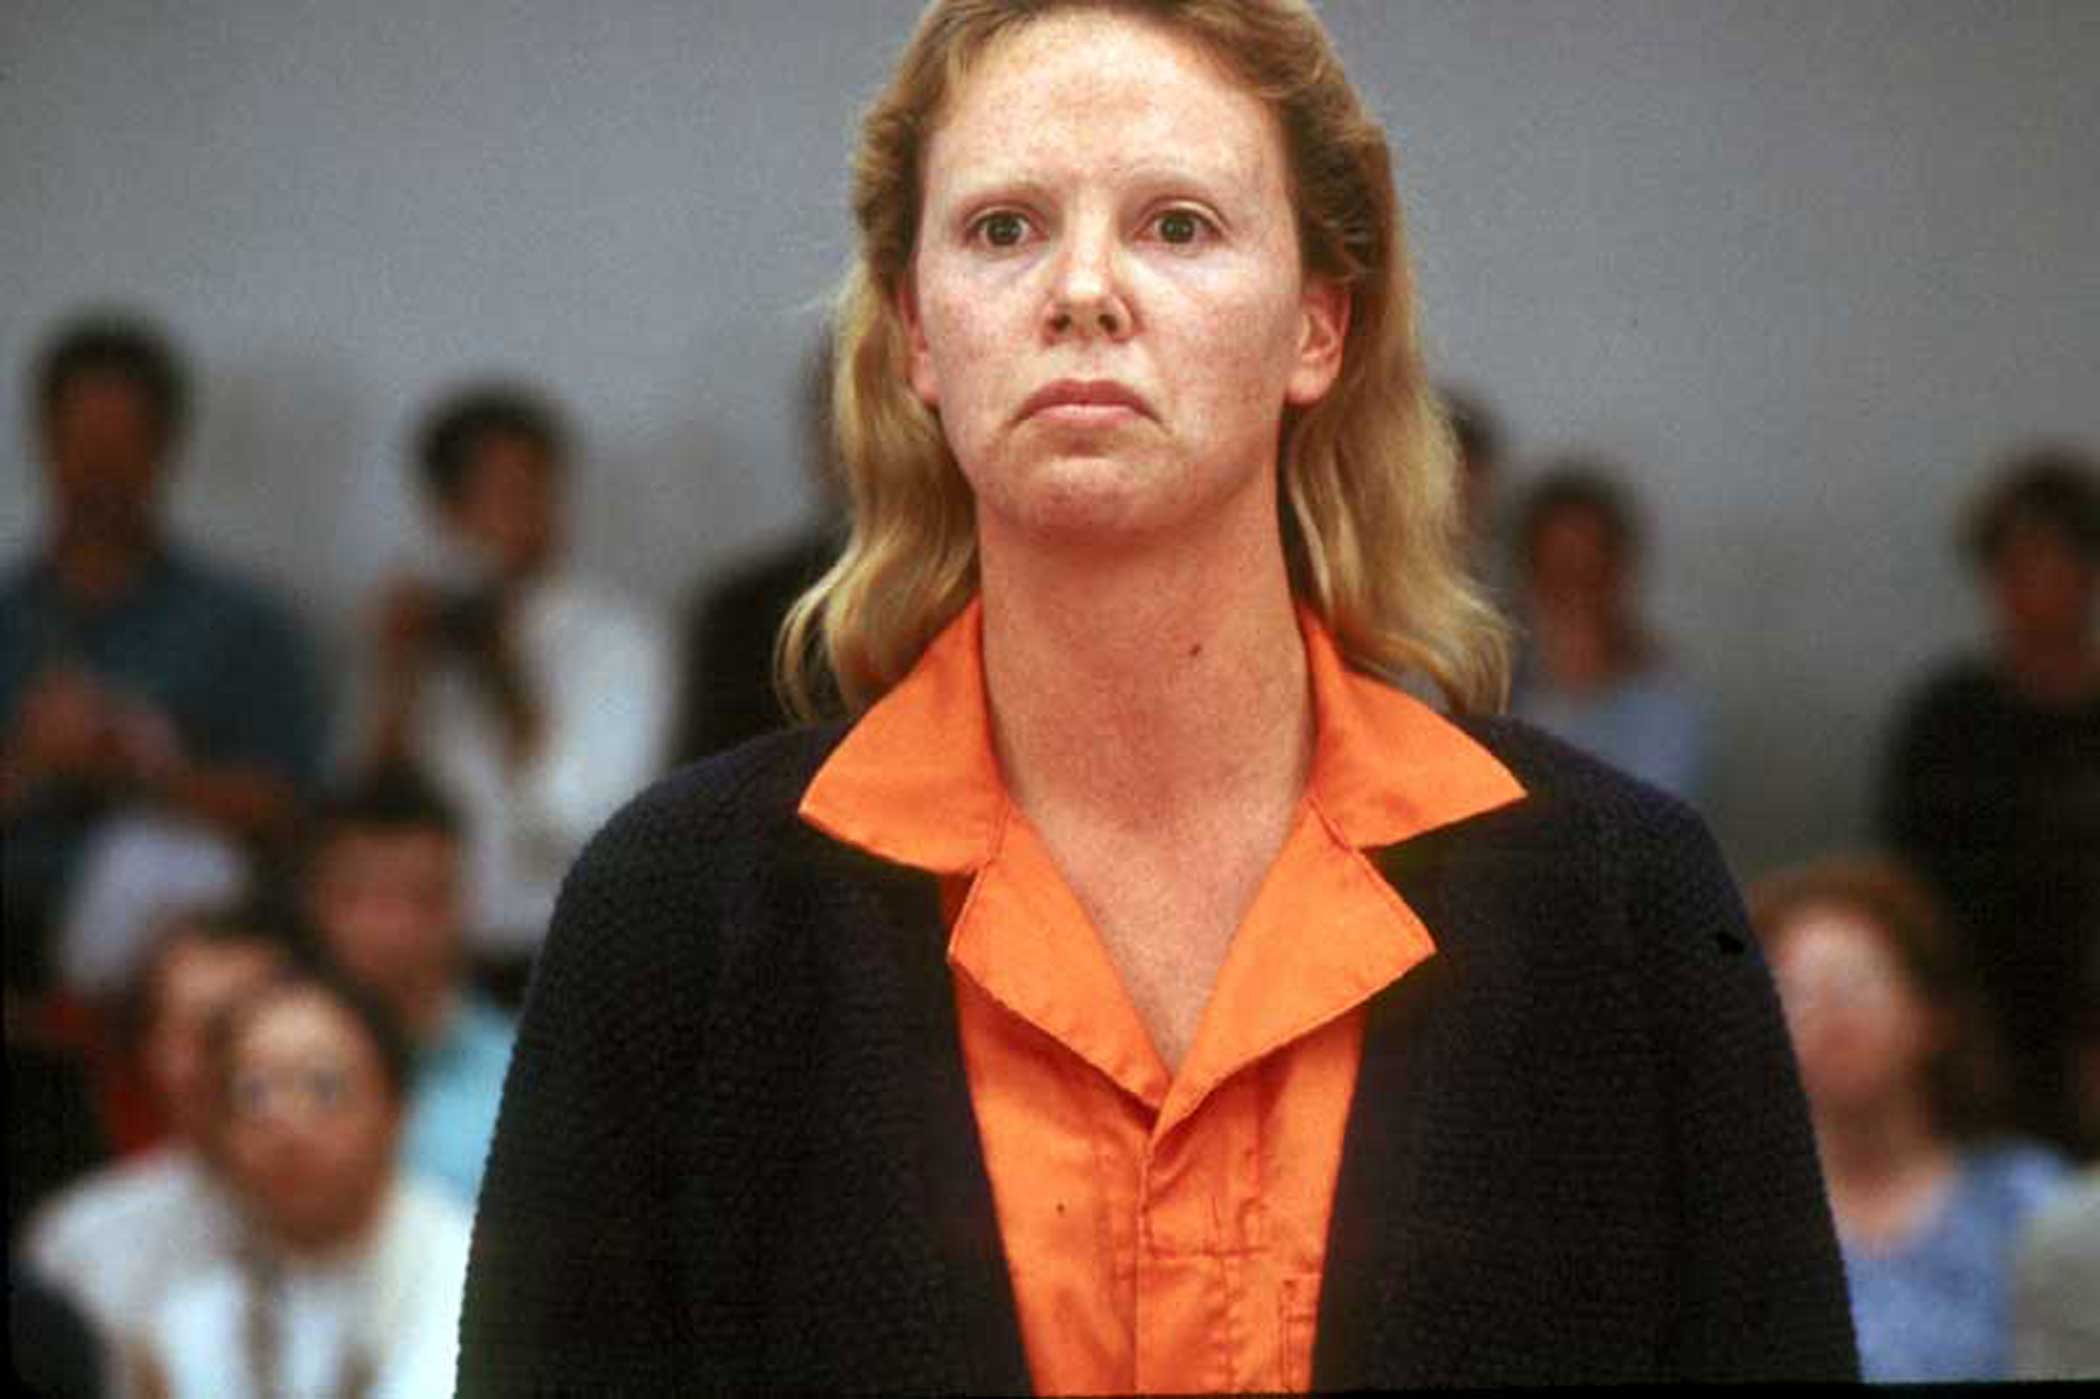 Monster, 2003 In this film, Charlize Theron portrays a chilling likeness of former prostitute Aileen Wuornos, a psychologically unstable serial killer who was executed in 2002 in Florida for killing six men. Since capital punishment was restored in 1976, Wuornos was the tenth women to be executed.